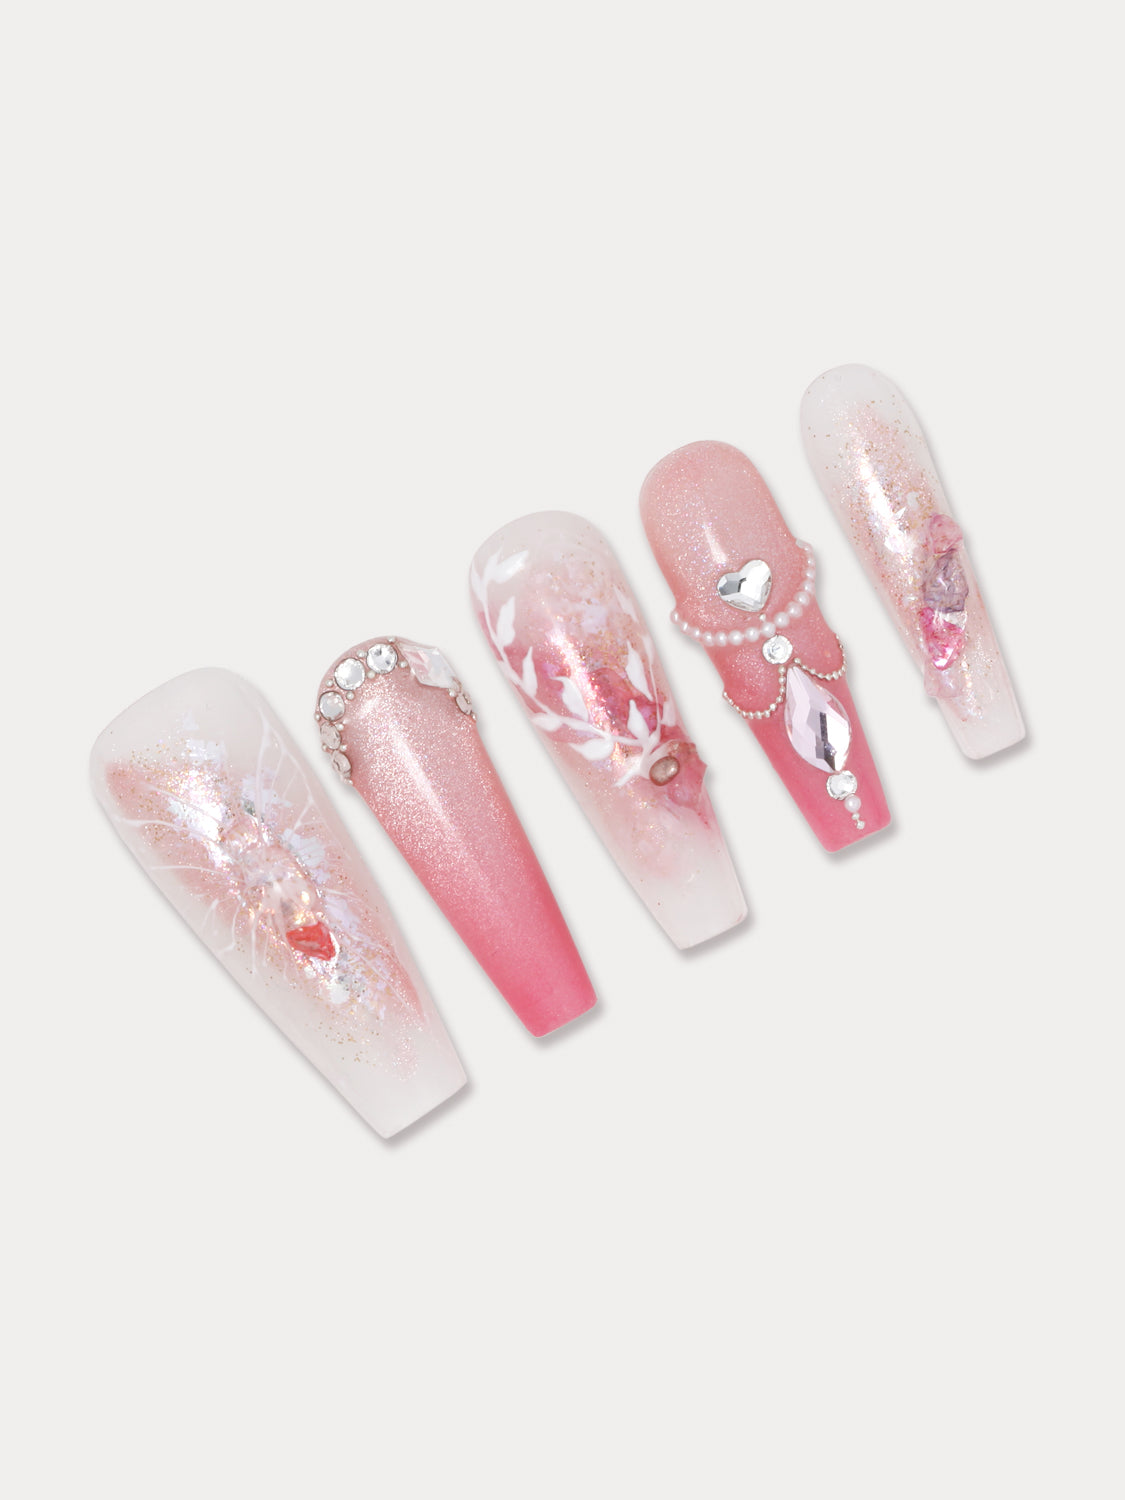 MIEAP Secret Garden Nail Set draws inspiration from a palace garden. It features hand-painted butterflies and roses to create a vibrant and fluttering floral sensation. And incorporates cat's eye gel, rhinestones, pearls, and more for a luxurious palace-like extravagance. The caviar embedding technique adds to the royal ambiance. #MIEAPnails #pressonnail #acrylicnail #nails #nailart #naildesign #nailinspo #handmadenail #summernnail #nail2023 #graduationnail #datingnail #promnail #pinknail 